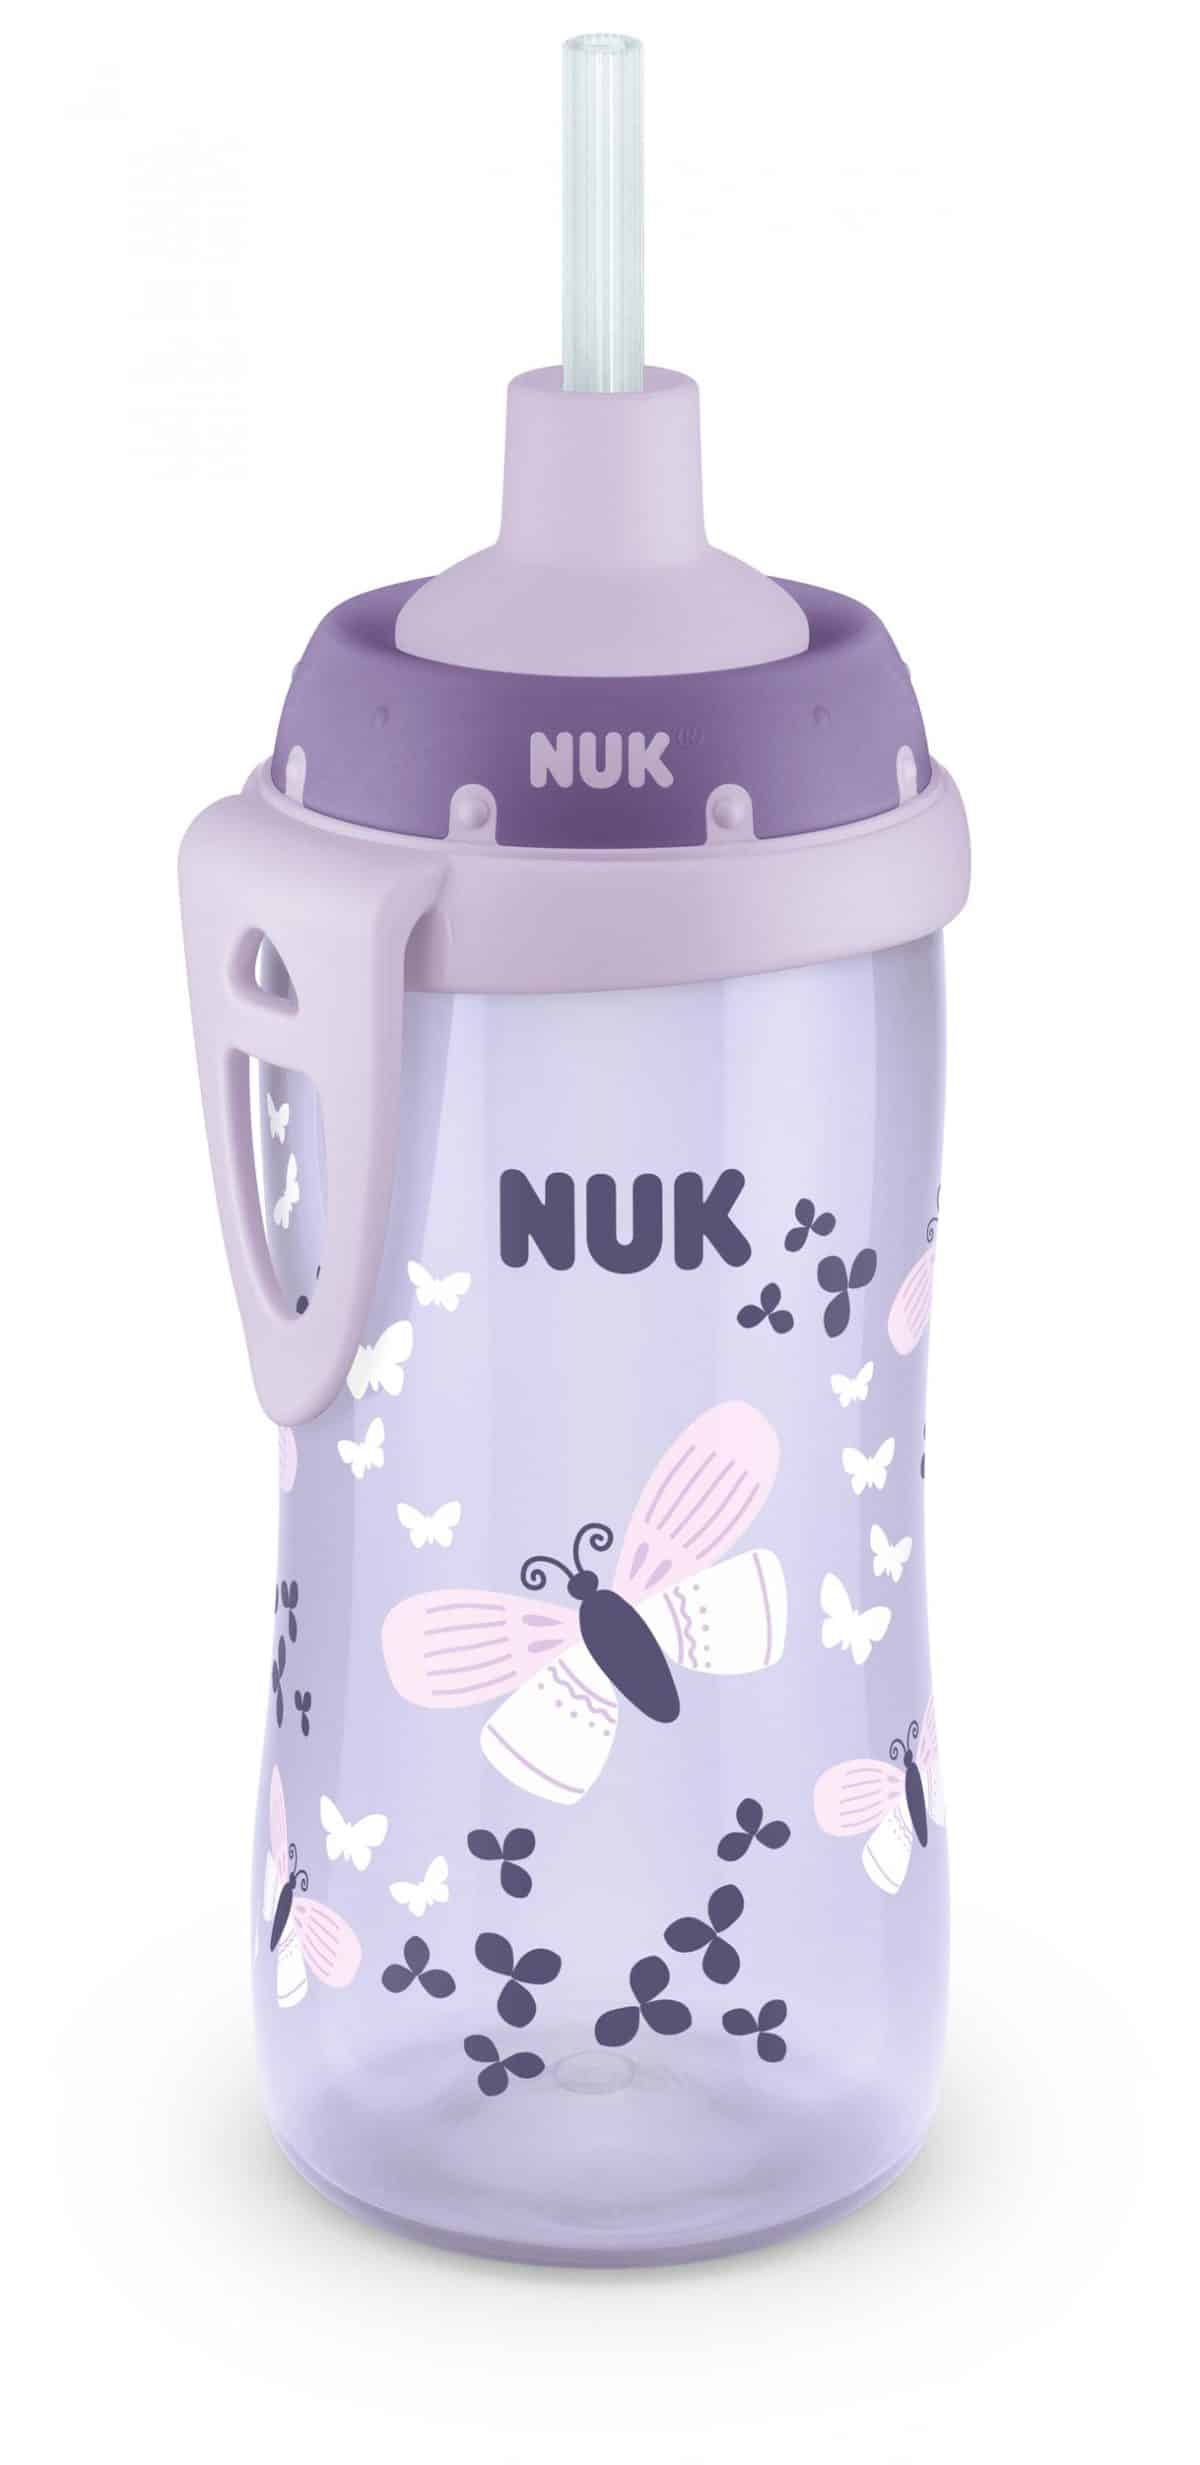 Nuk Malta - The NUK First Choice Flexi Cup! 💜 - 12m+ - Soft Straw Cup -  Convenient carrying clip for on-the-go - 300ml